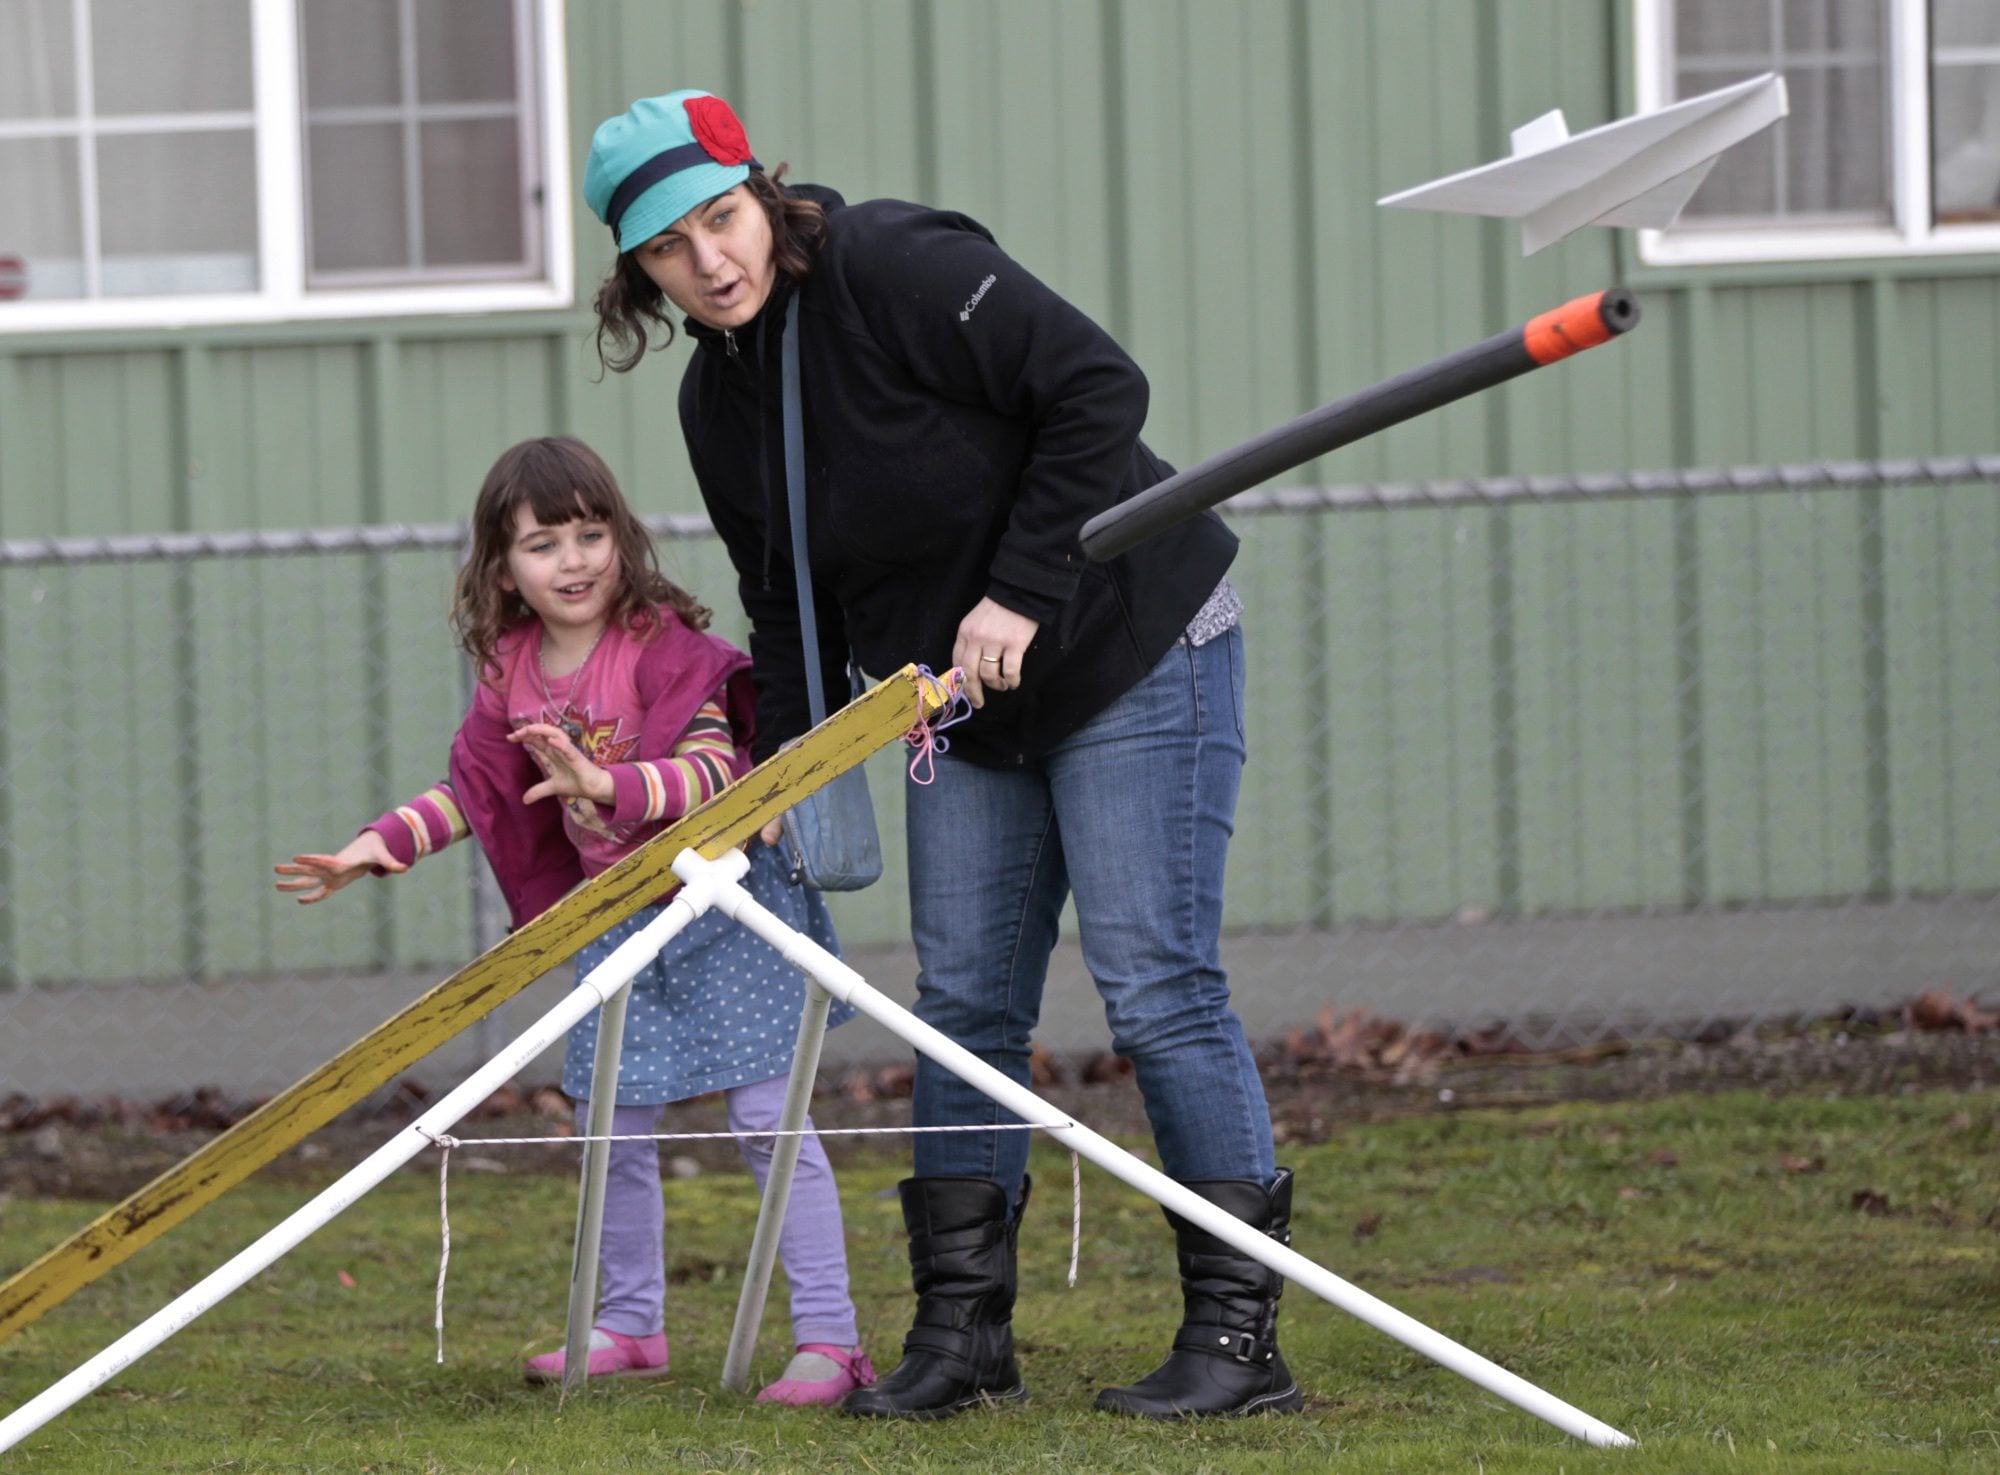 Vivian Larson, 4, and Danielle Galipeau (mom) of Portland launch a glider at the Pearson Field Education Center. The center hosted a day of flight simulation and model-glider building for kids.